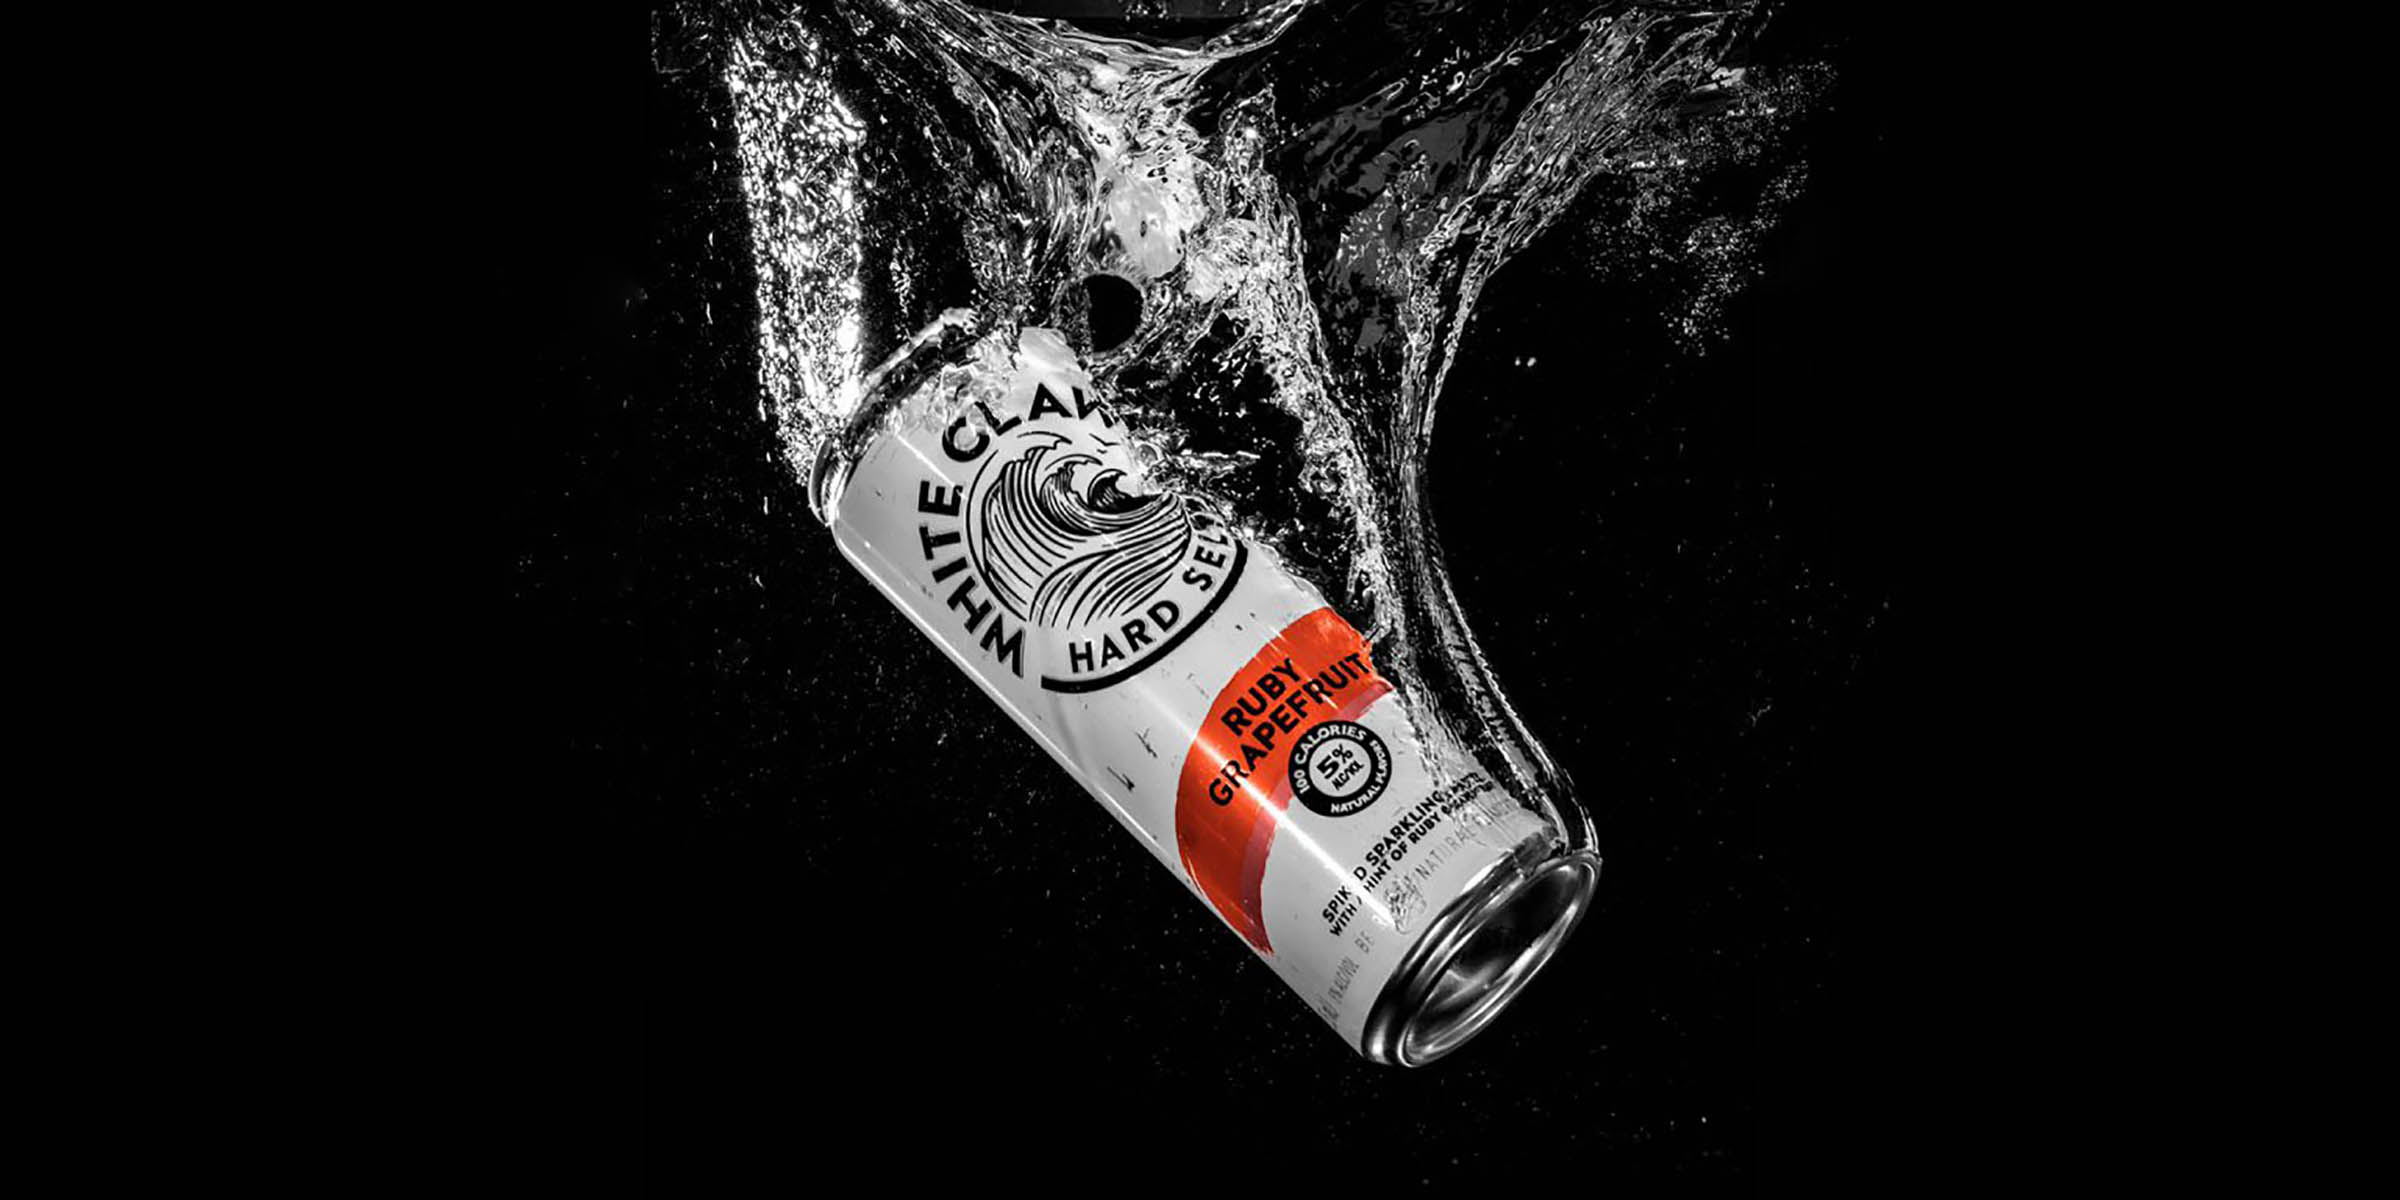 White Claw Hard Seltzer Filled The Alcohol Gap No One Knew Was Missing